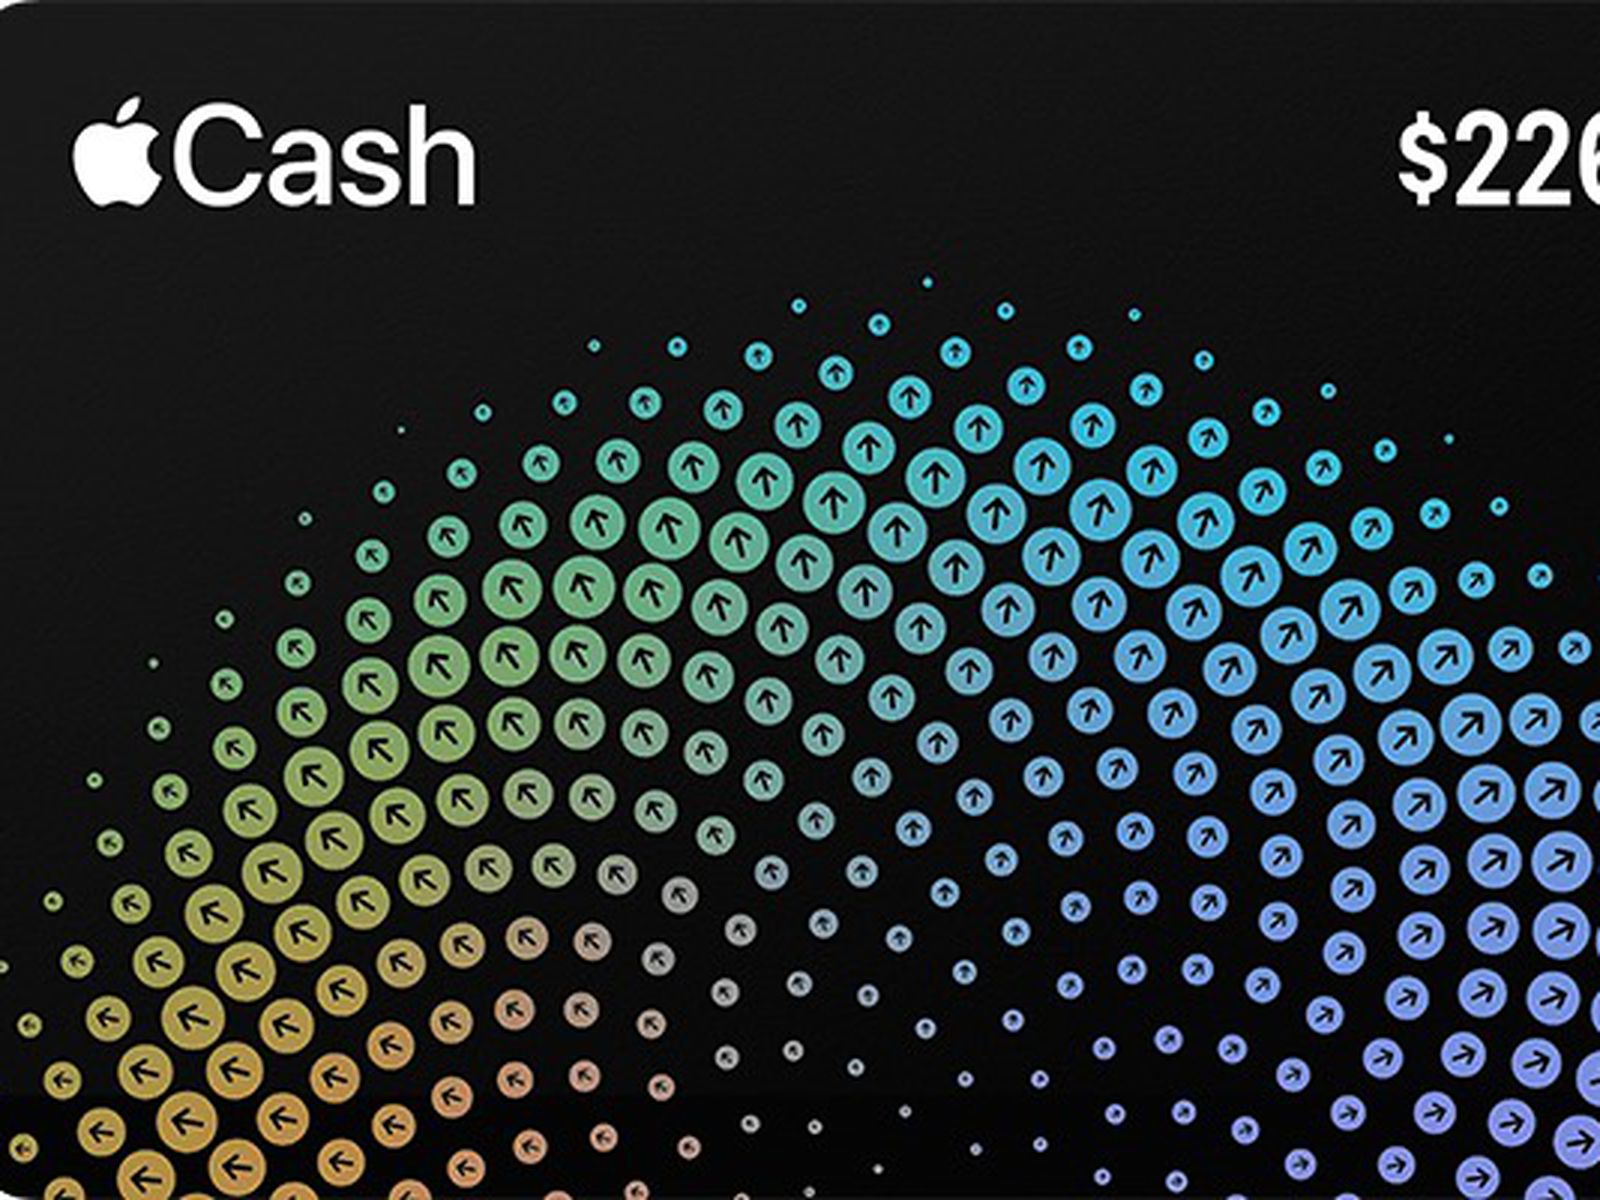 Apple Cash Instant Transfer Now Works With Mastercard Debit Cards Macrumors